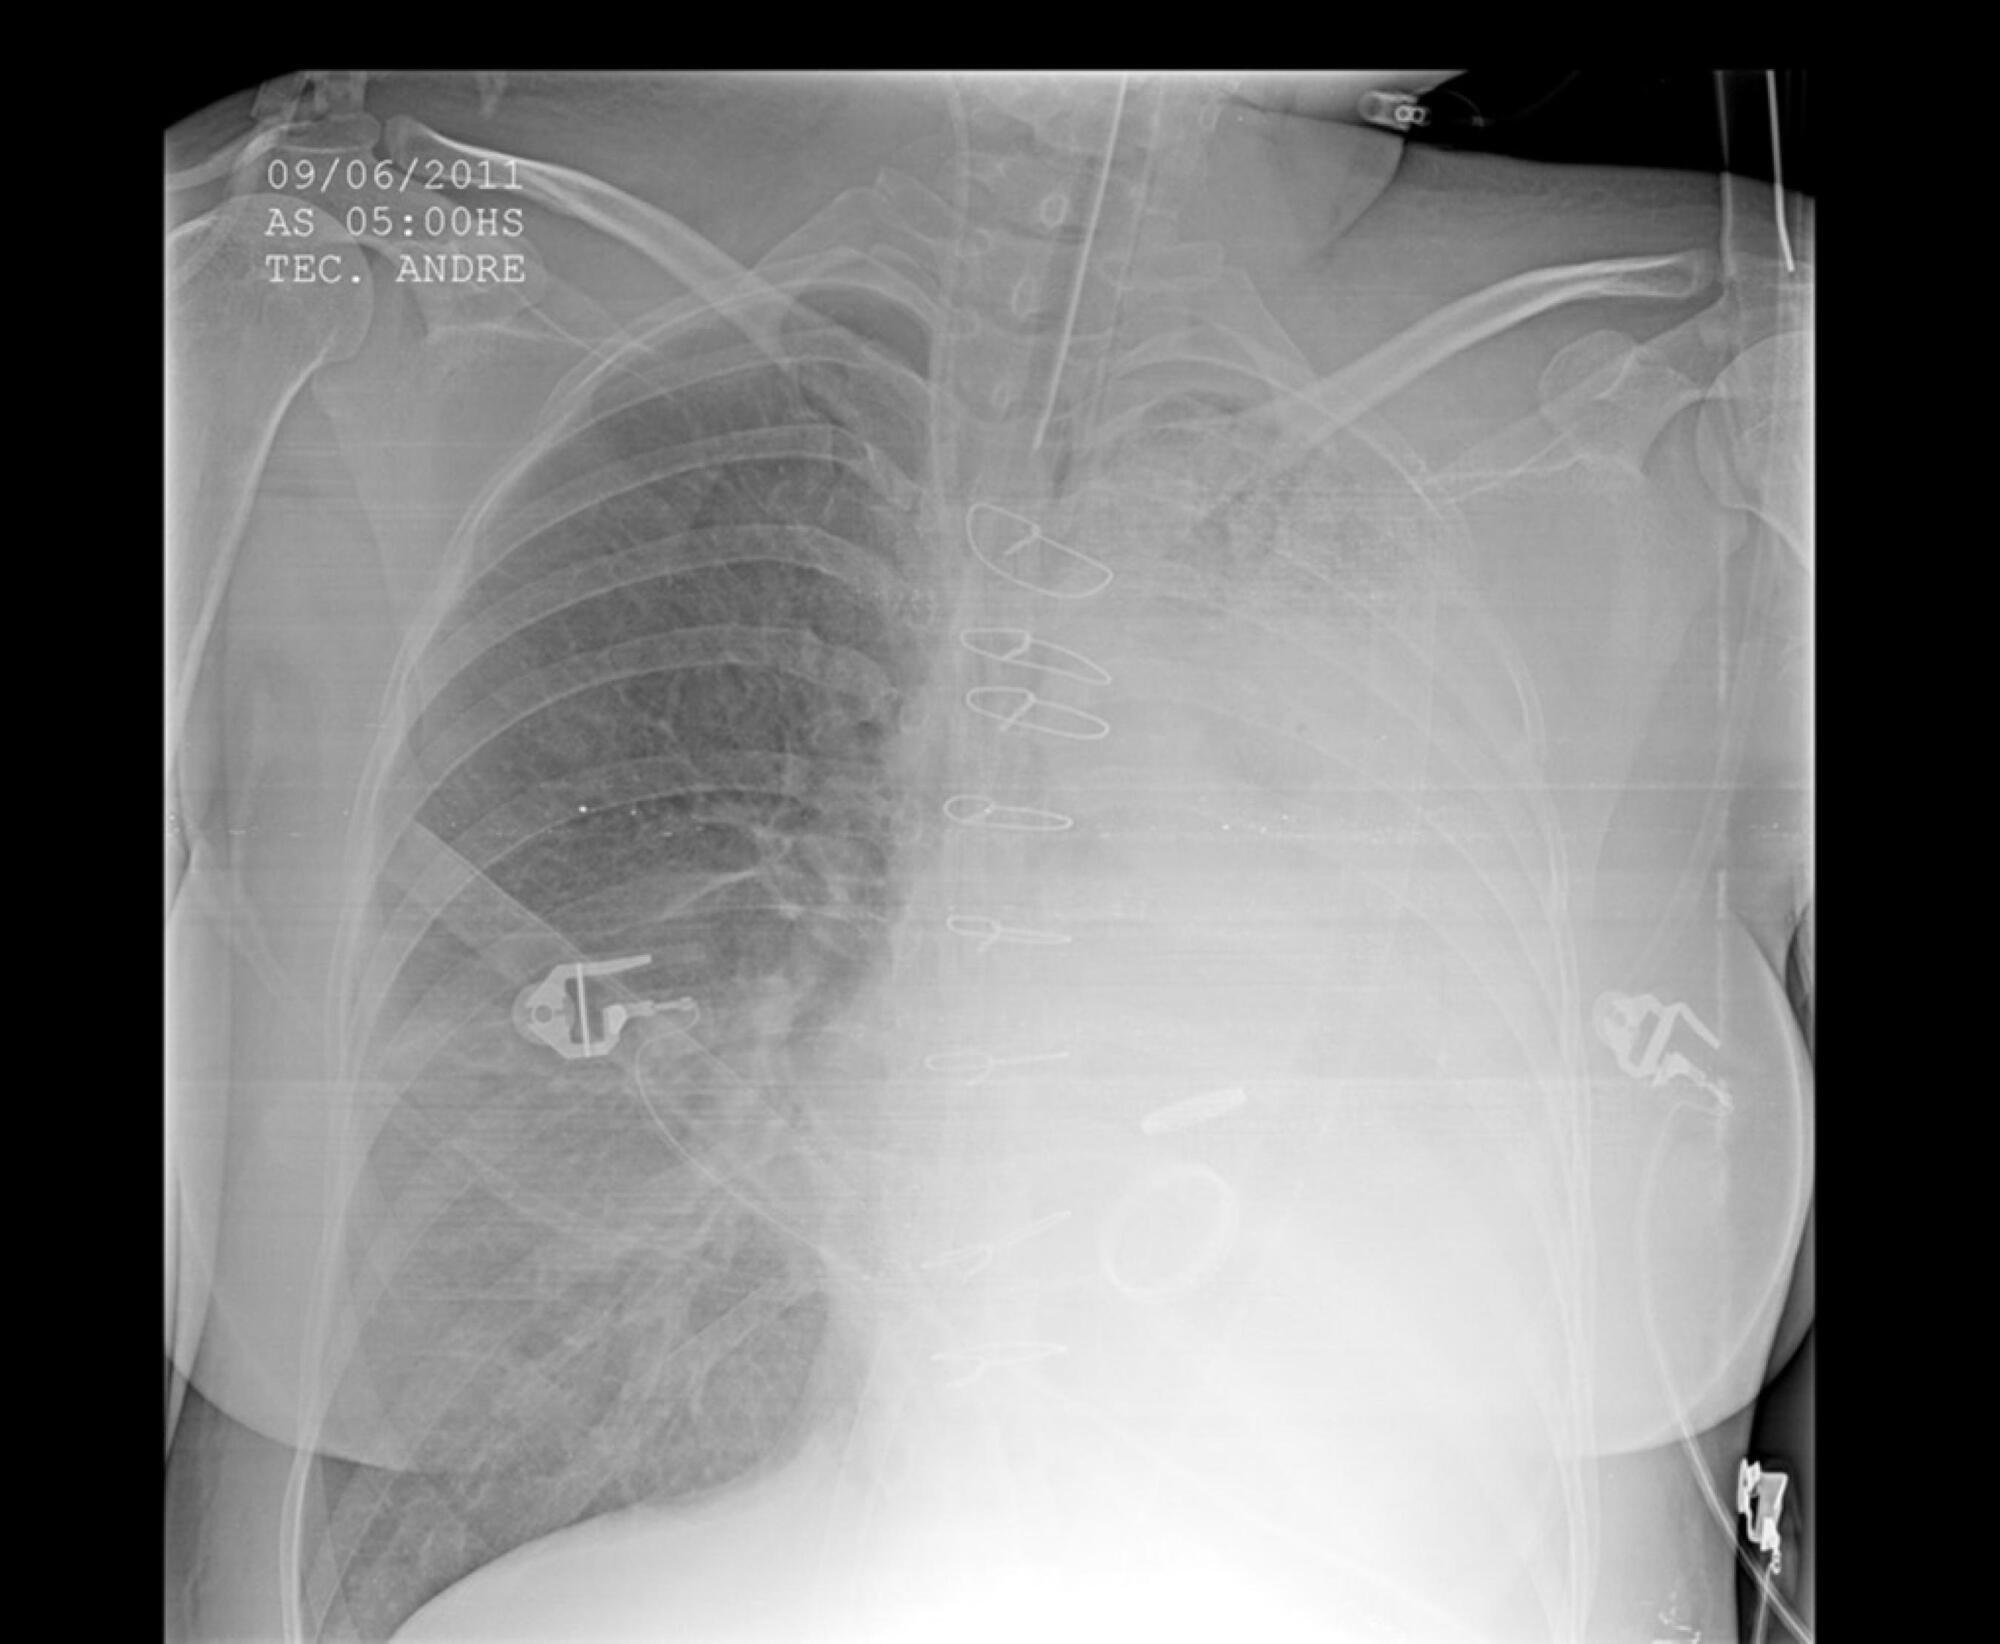 Massive hemoptysis successfully treated with extracorporeal membrane oxygenation and endobronchial thrombolysis